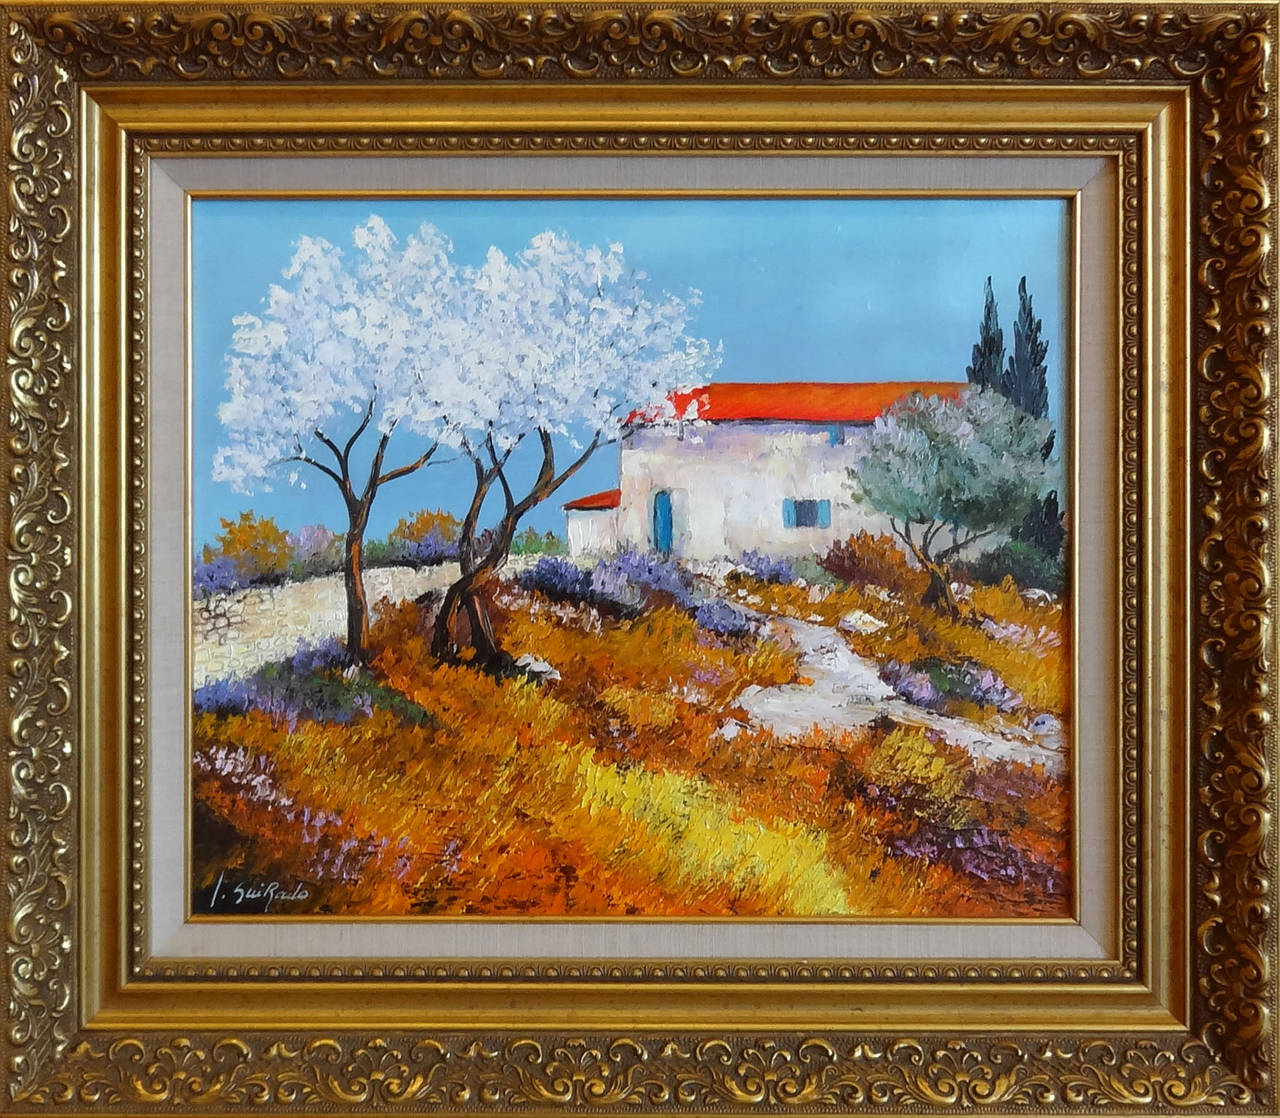 Les Amandiers (The Almond Trees) - Painting by Alain Guirado